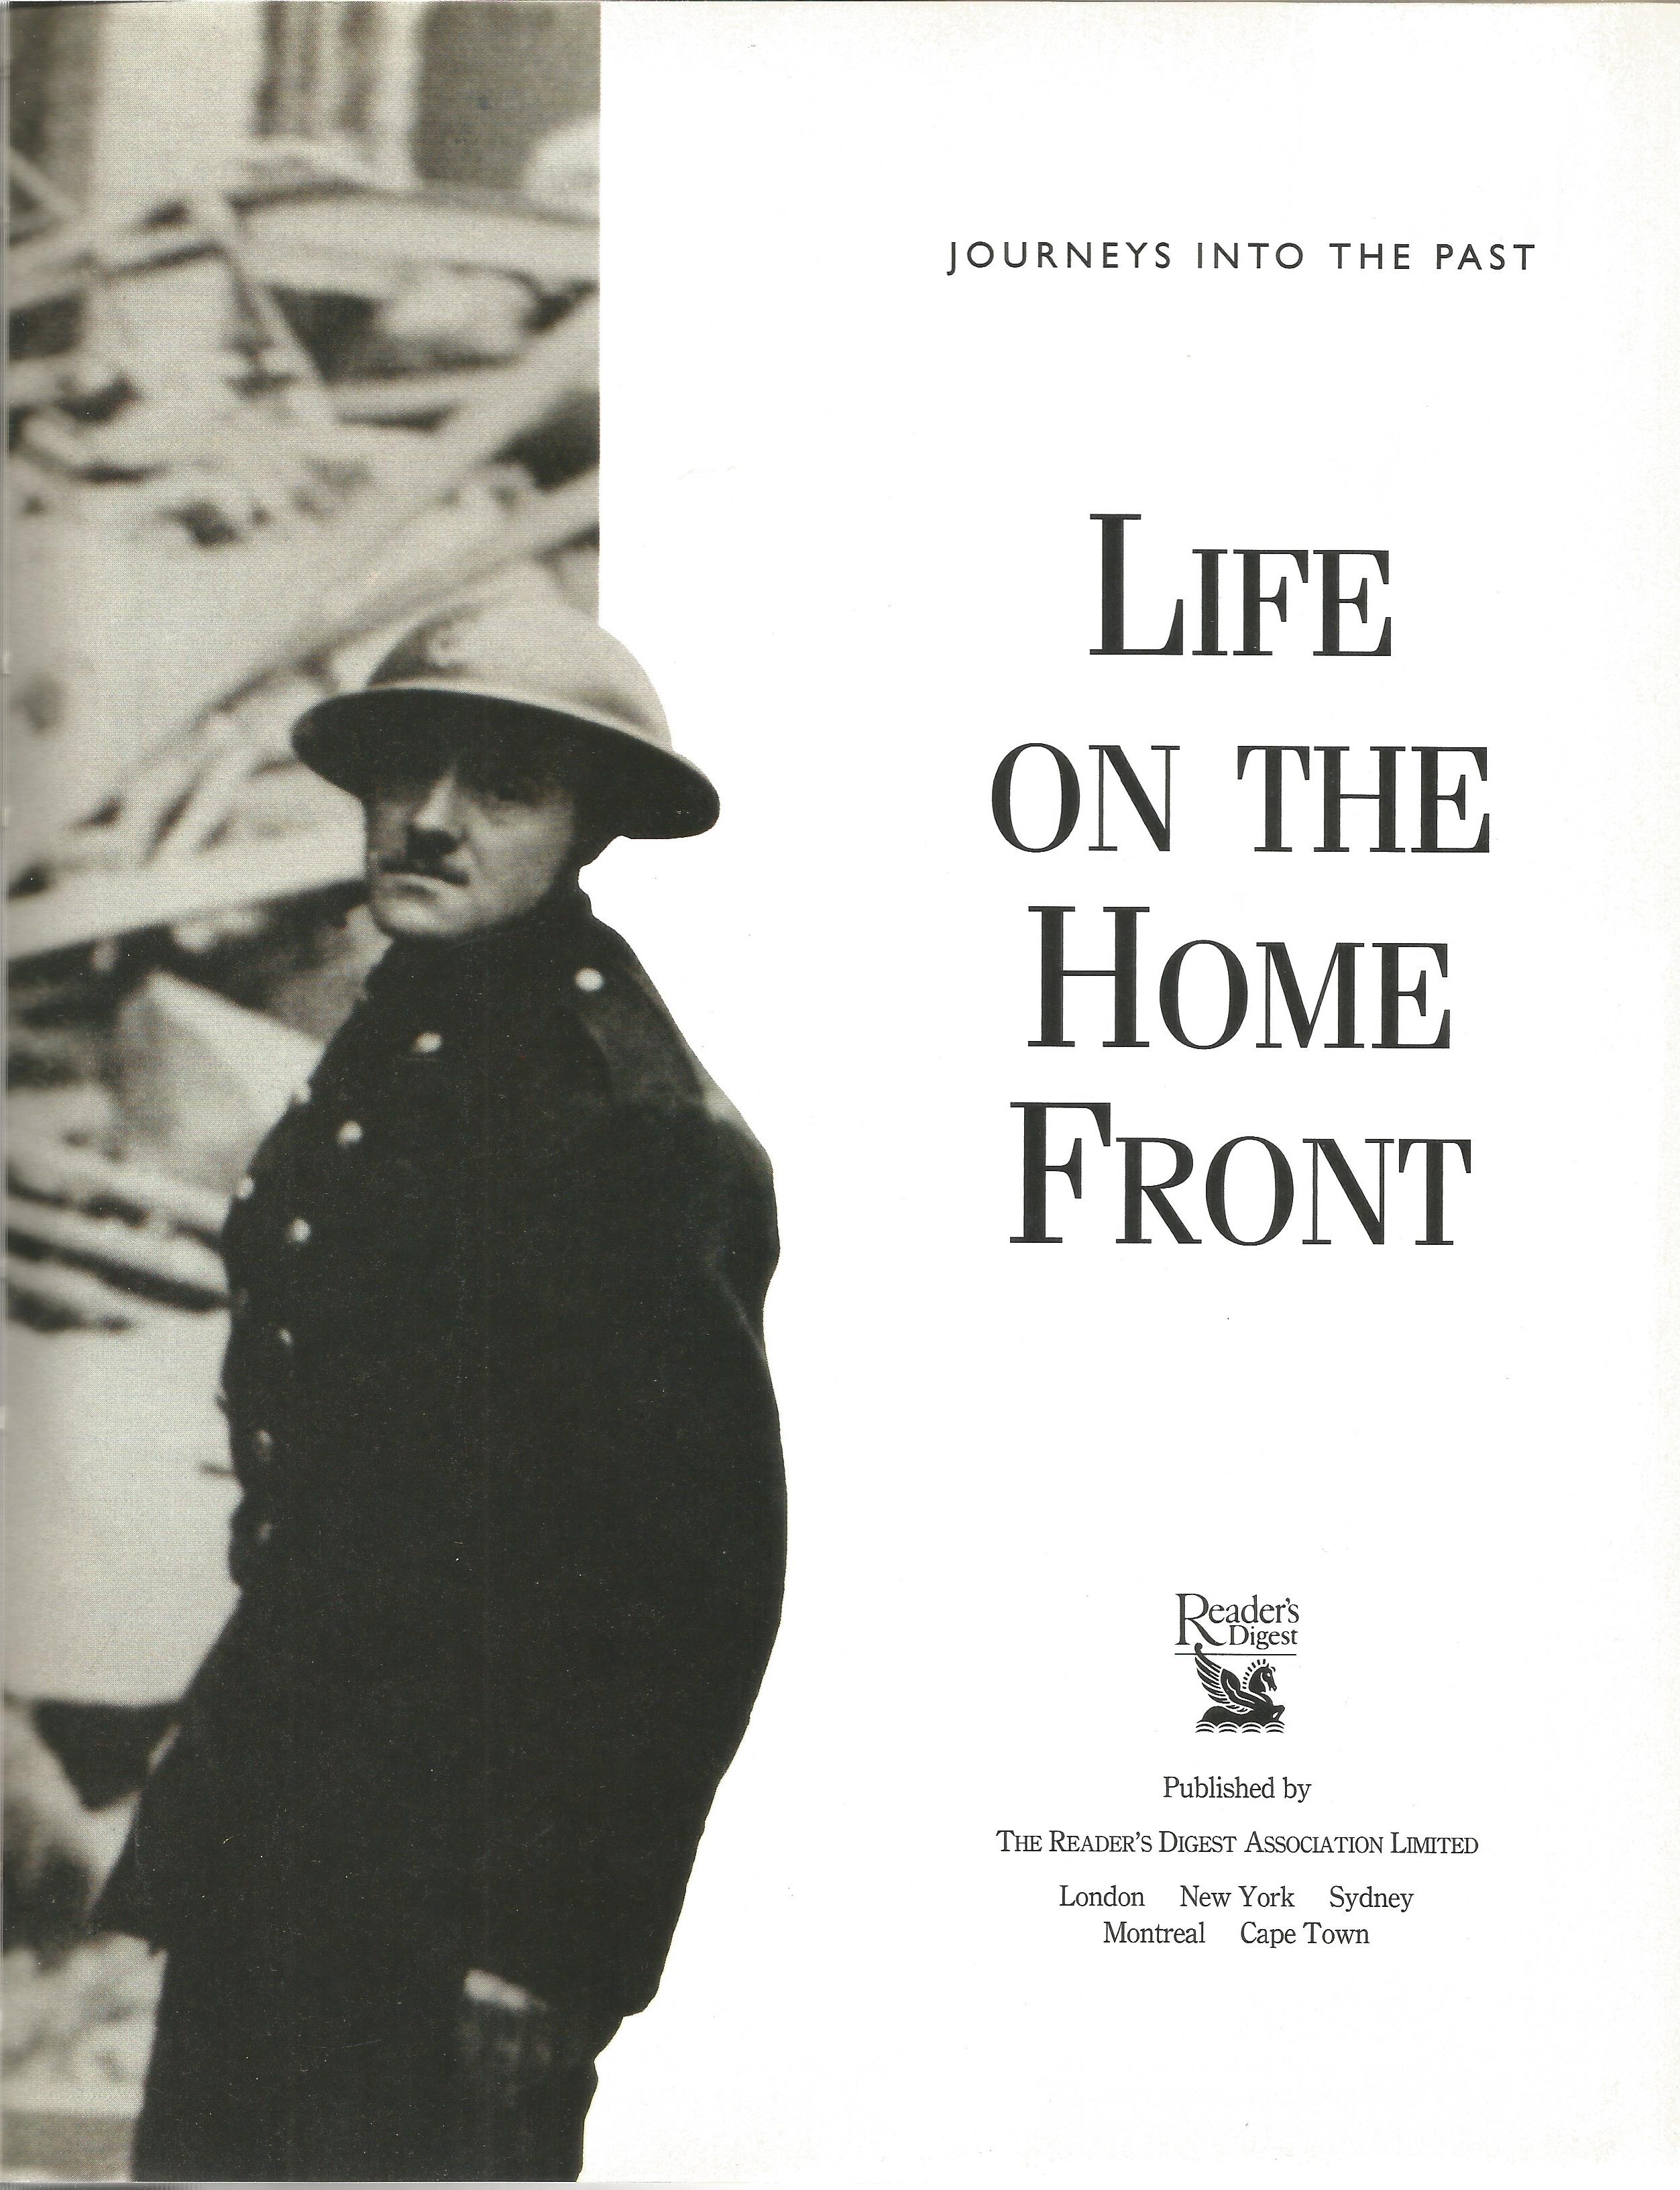 Reader's Digest Journeys into the Past Life on The Home Front 1994 Hardback Book published by The - Image 2 of 3